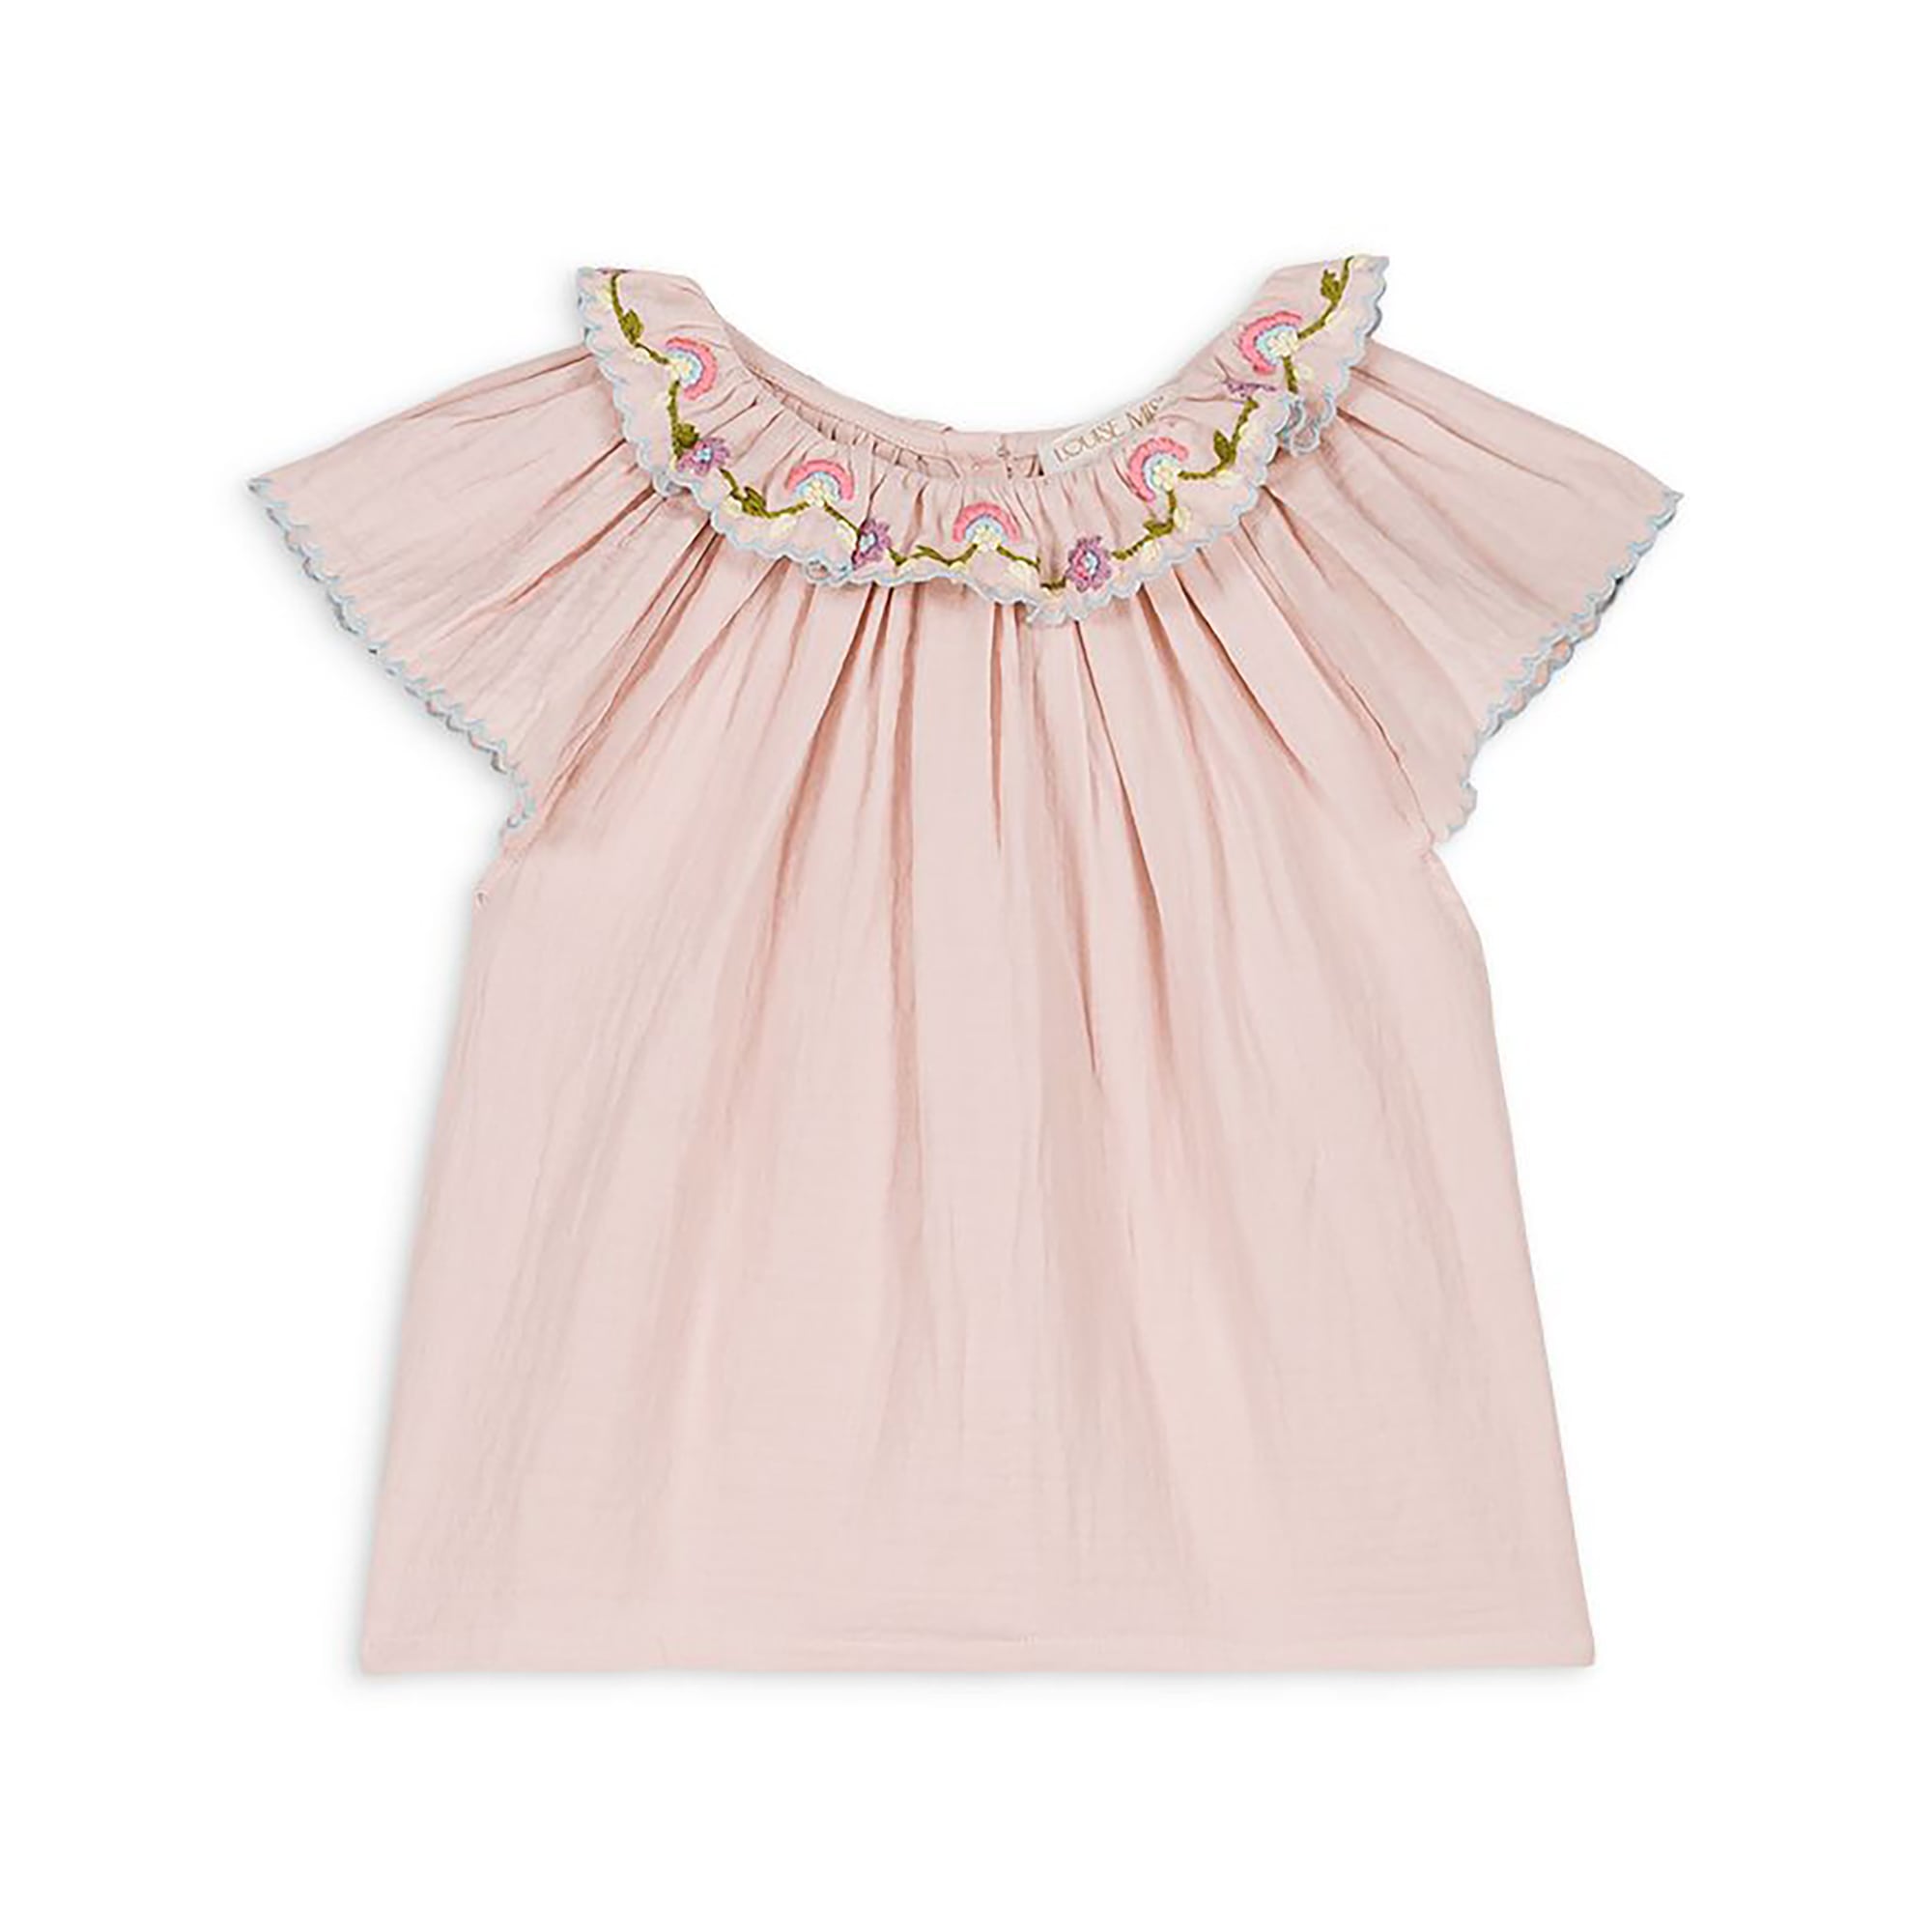 Girls Pink Embroidered Cotton Top